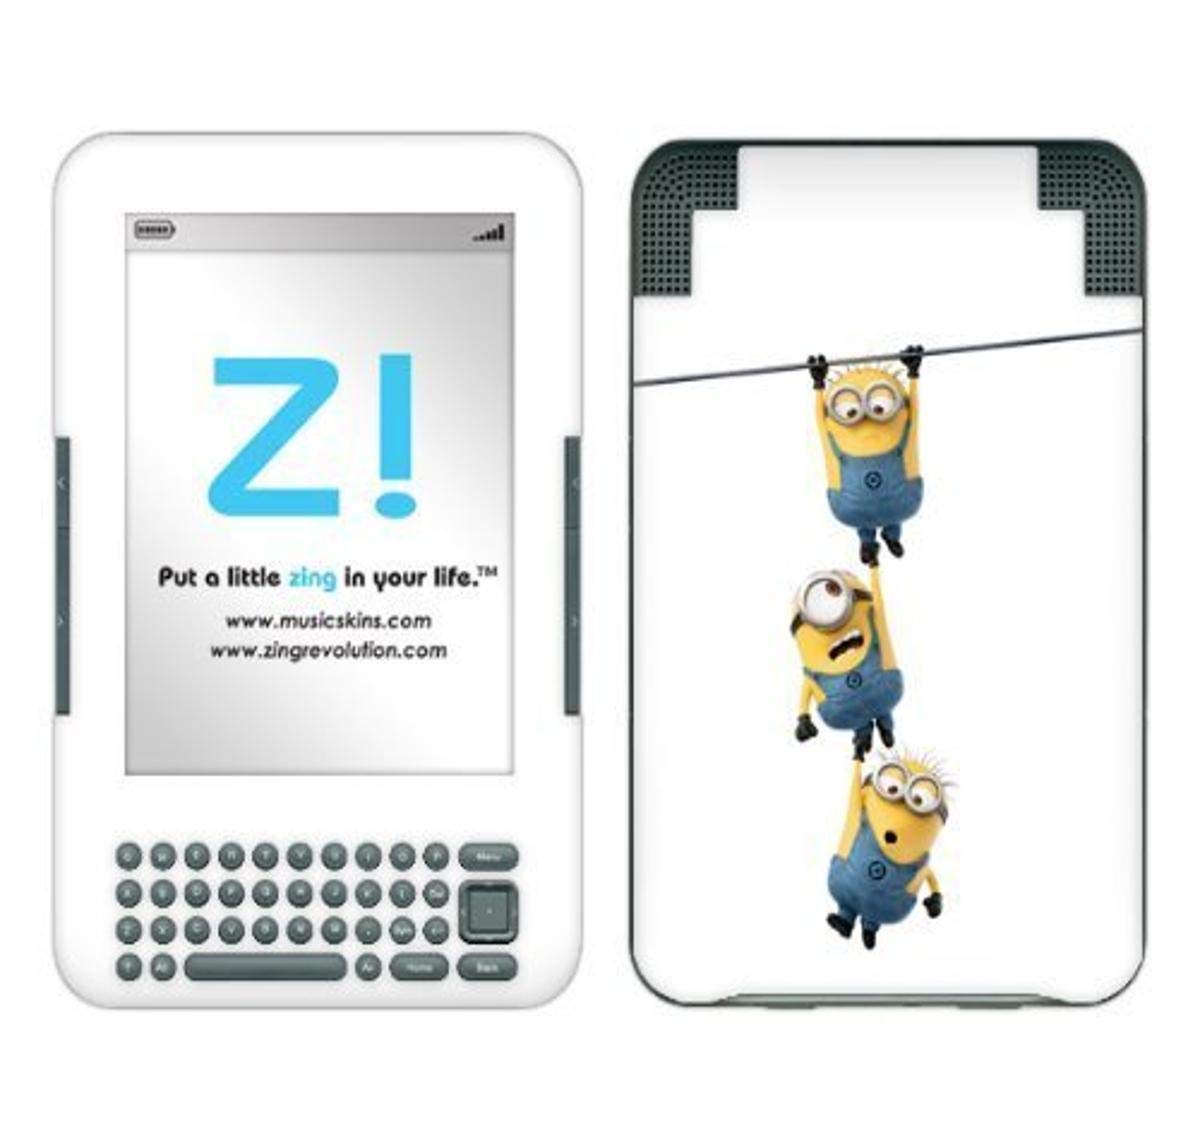 Zing Revolution Despicable Me 2 - Hanging On Cover Skin for 6-Inch Display e-Reader